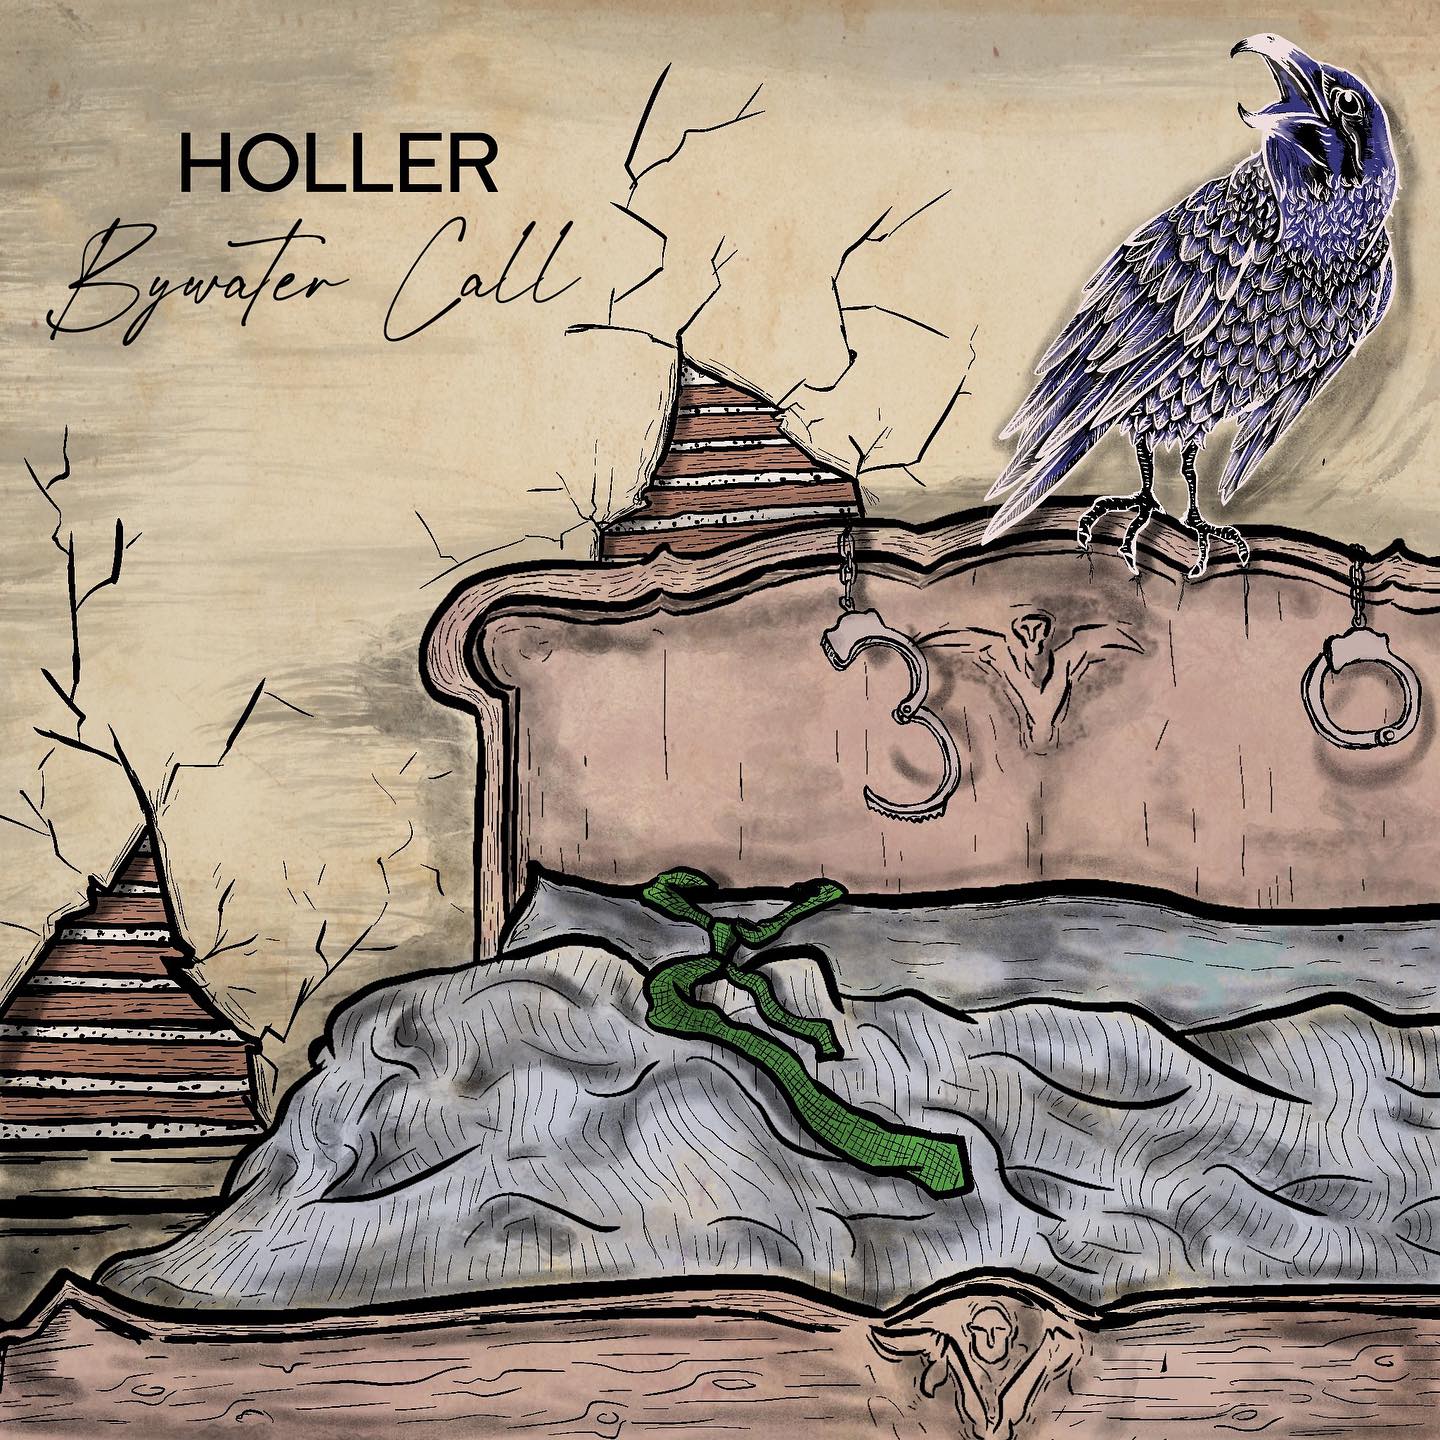 Bywater Call - Holler